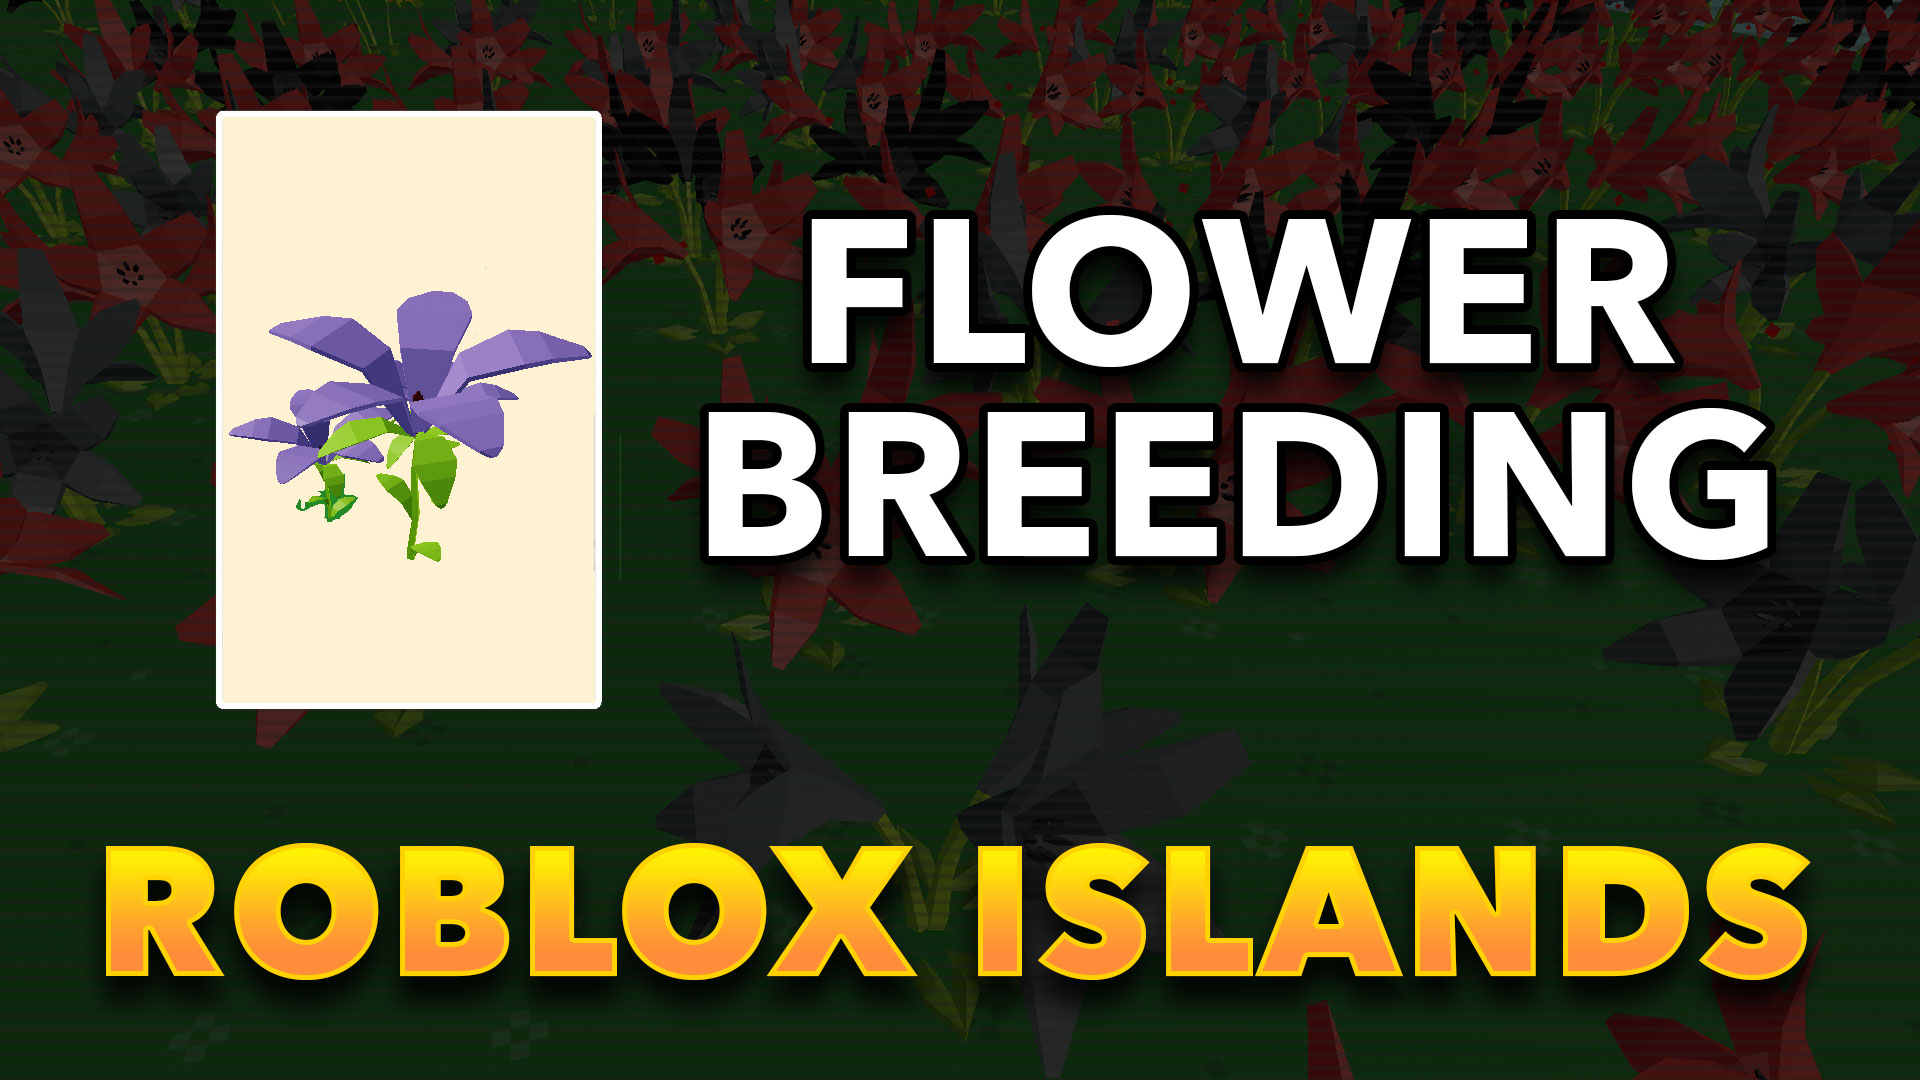 Roblox Islands Flower Breeding Tips And Tricks Thoroughly Tested - blue_jays roblox